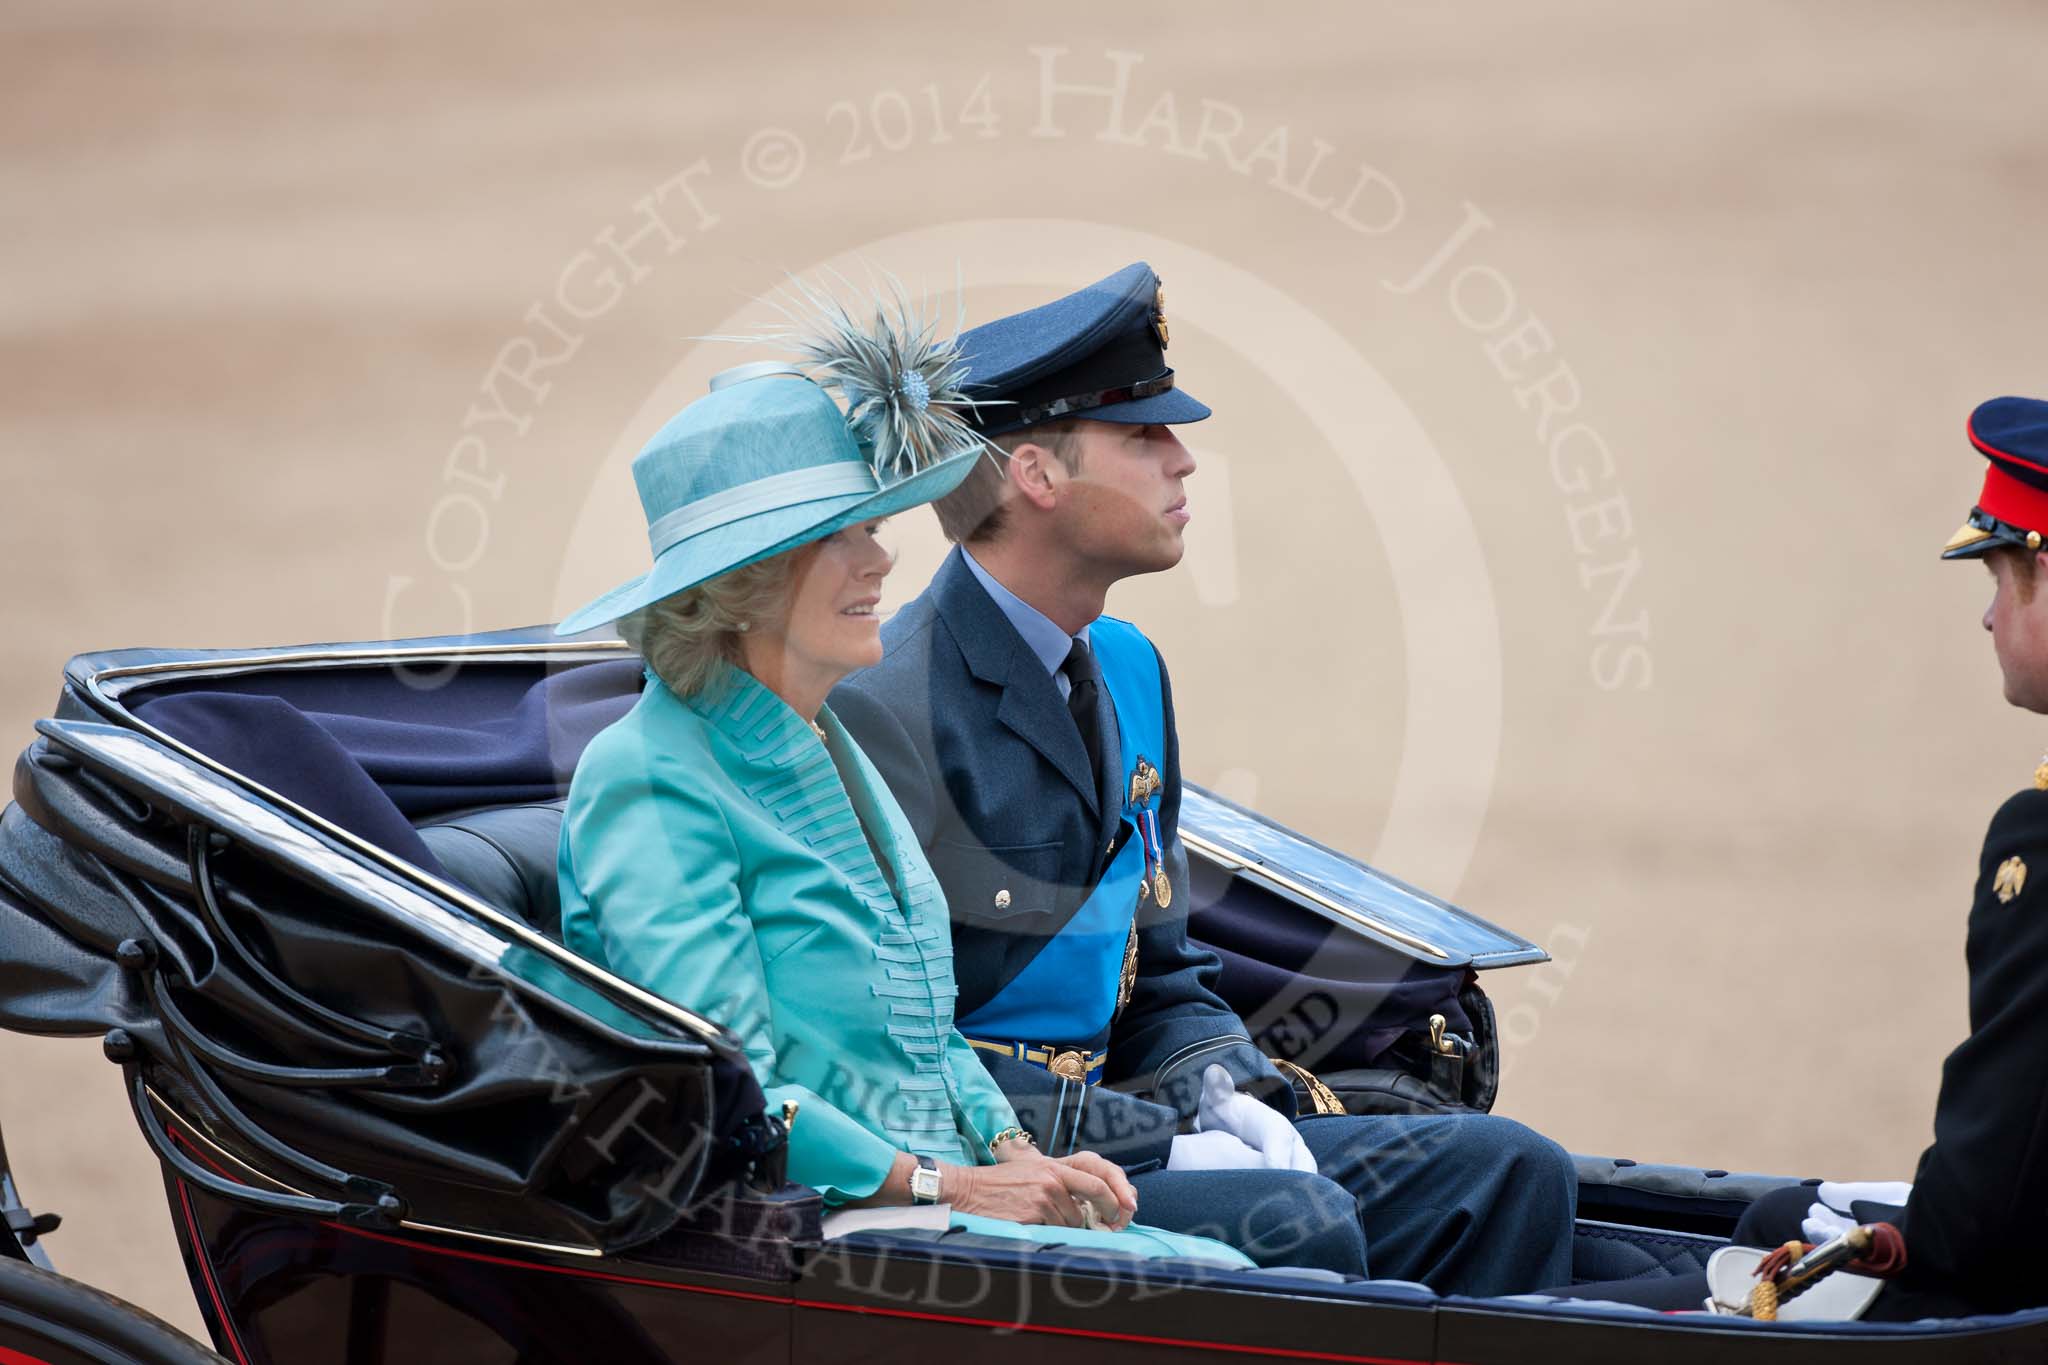 Trooping the Colour 2009: In the first of the two barouche carriages HRH the Duchess of Cornwall, next to her HRH Prince William, and opposite and out of sight HRH Prince Harry..
Horse Guards Parade, Westminster,
London SW1,

United Kingdom,
on 13 June 2009 at 10:49, image #95